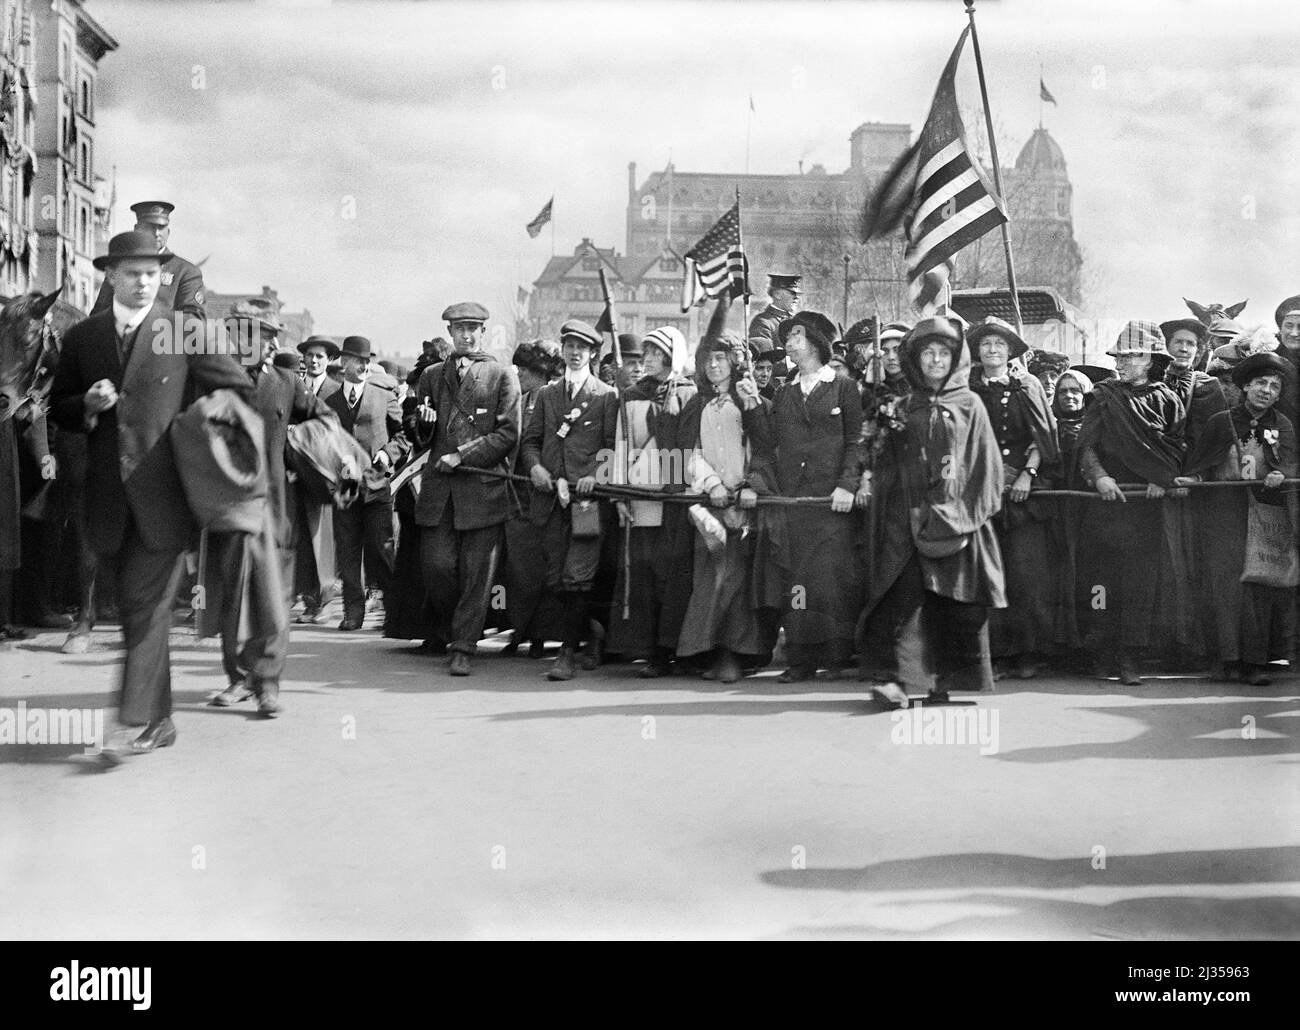 New York Suffragettes marching in Parade, Washington, D.C., USA, Harris & Ewing, 1913 Stock Photo